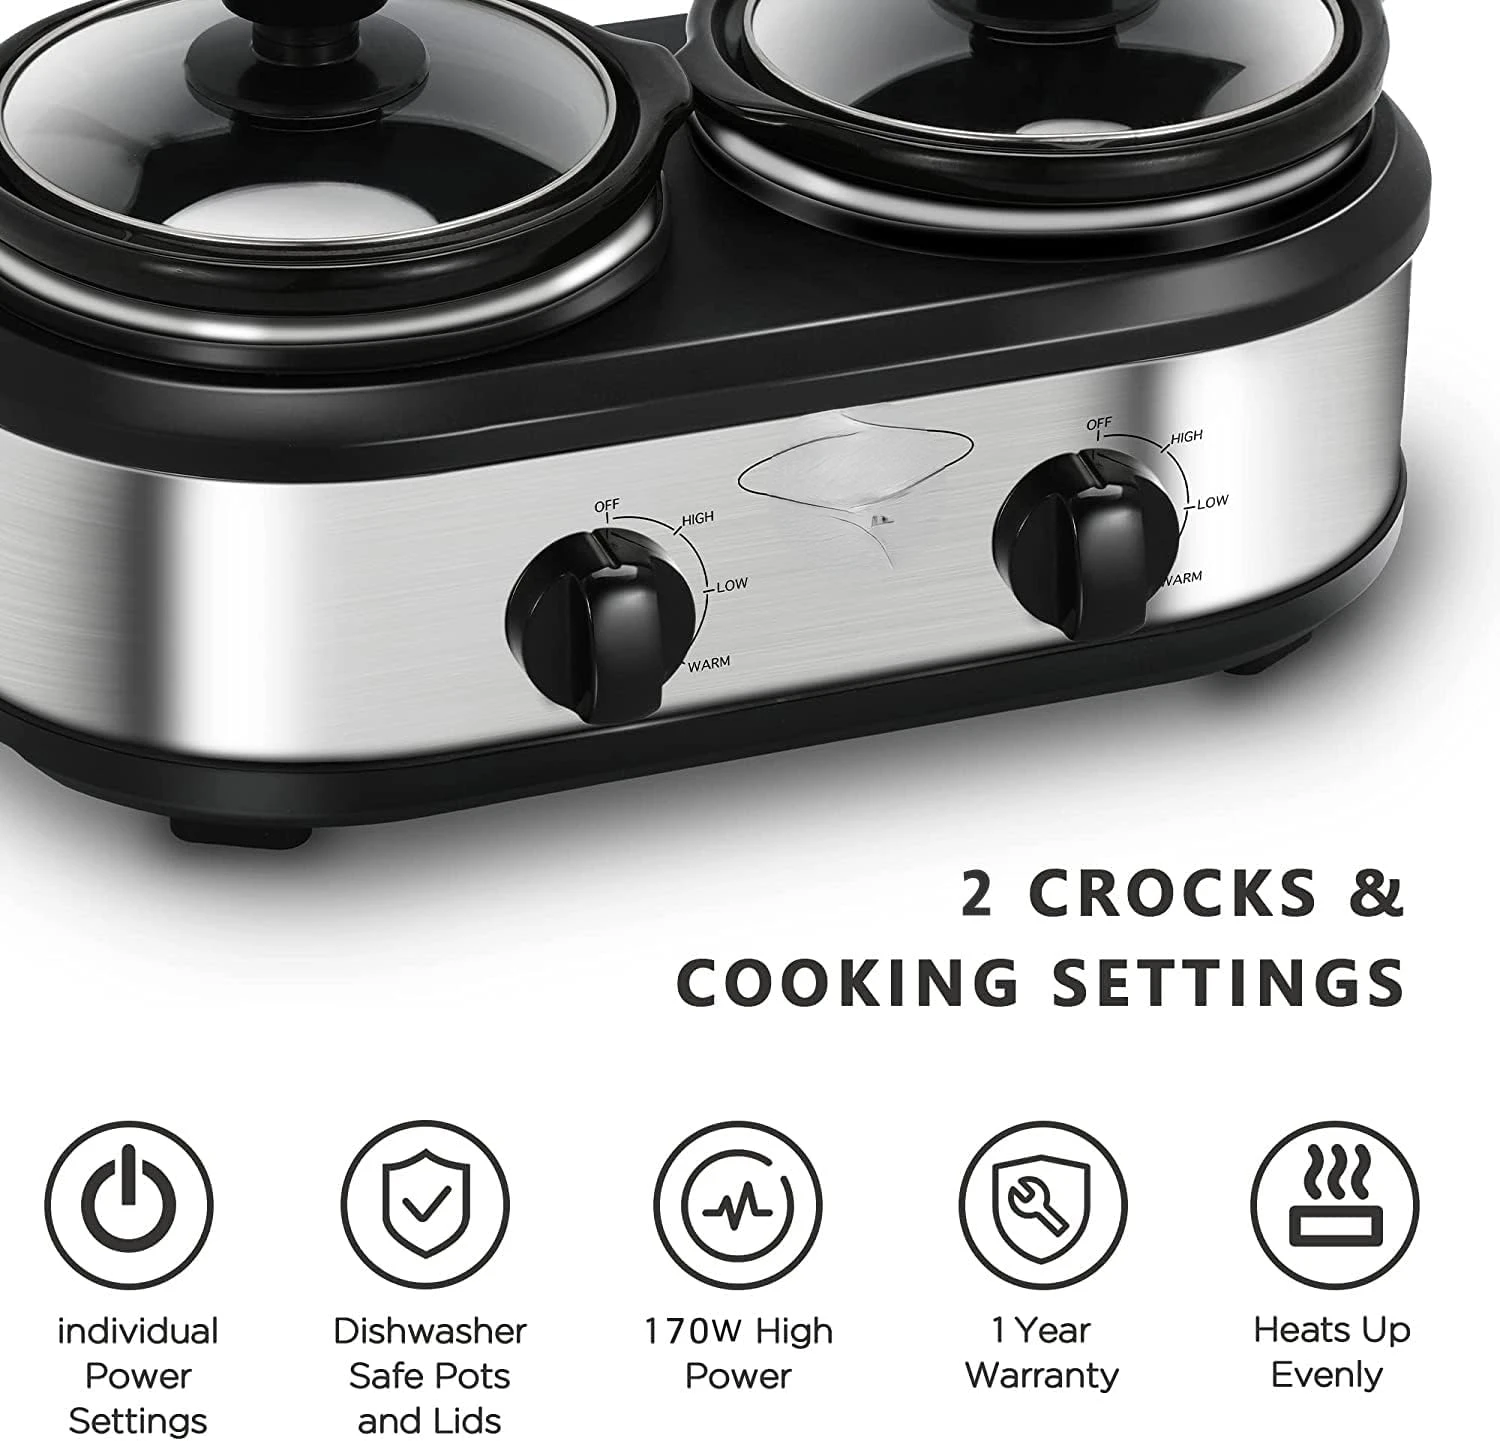 Double Slow Cooker,2 Pot Small Mini Crock Buffet Servers and Warmer,Dual Pot  Oval Manual Slow Cooker Cooking Appliance - AliExpress